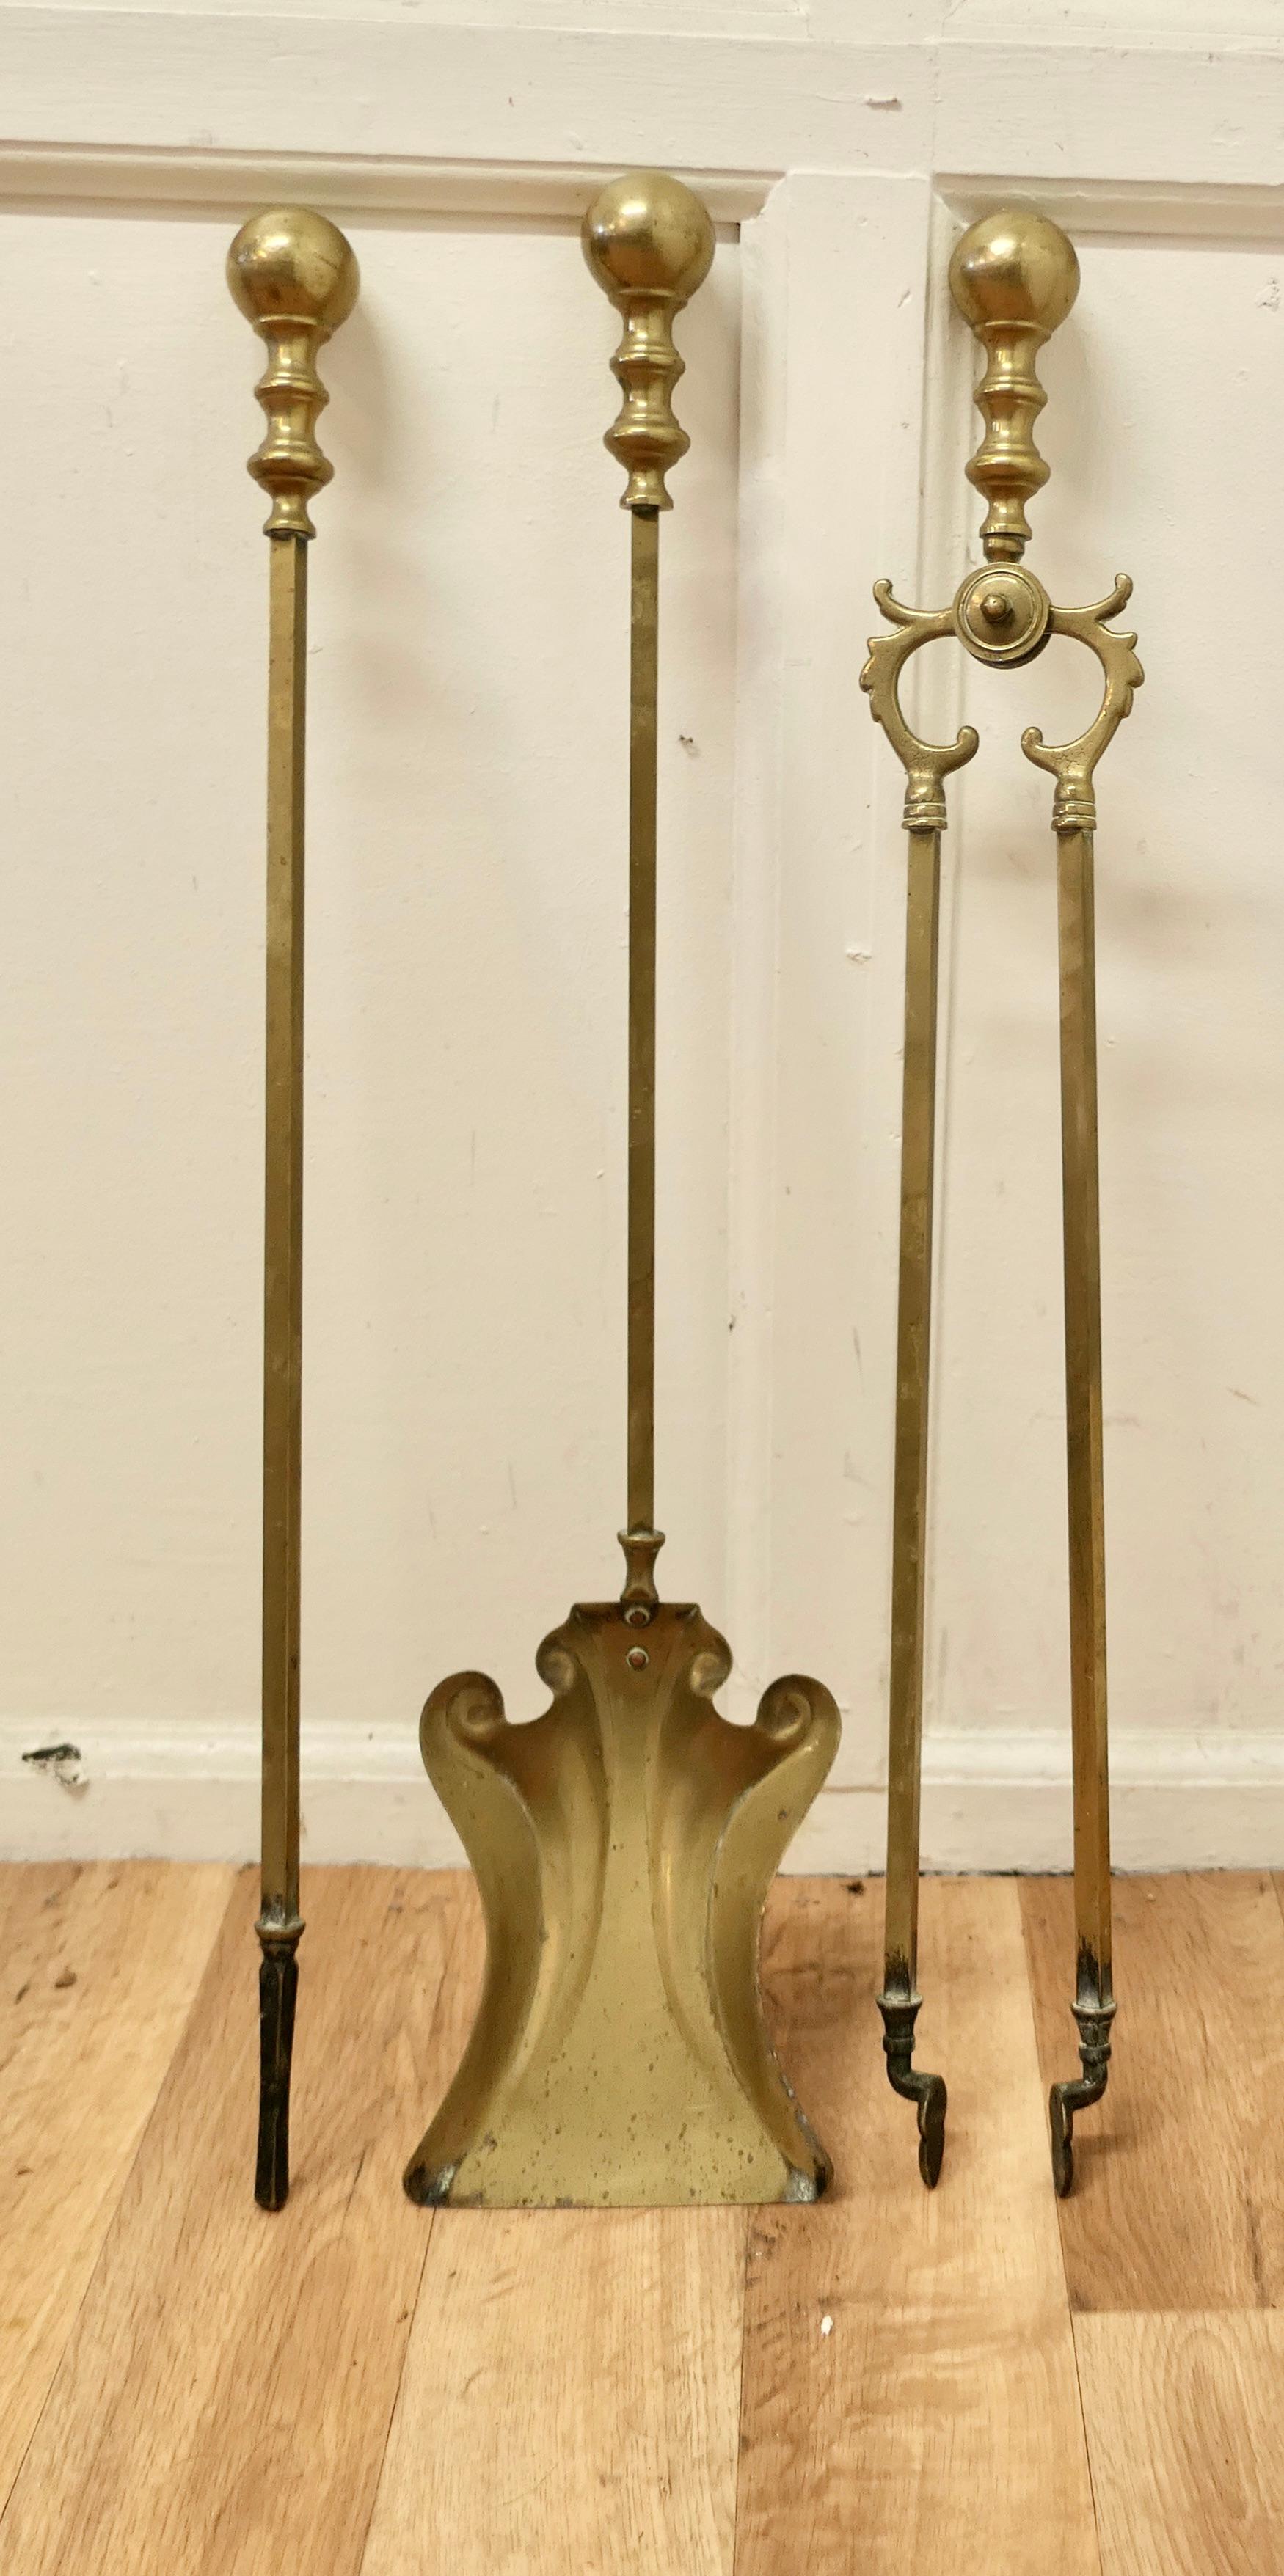 Attractive Brass Fireside Companion Set, Fireside tools

A great trio, tongs, shovel and poker, with a large ball handles made in Brass and in good used condition
The tools are 28” long
THM151.
 